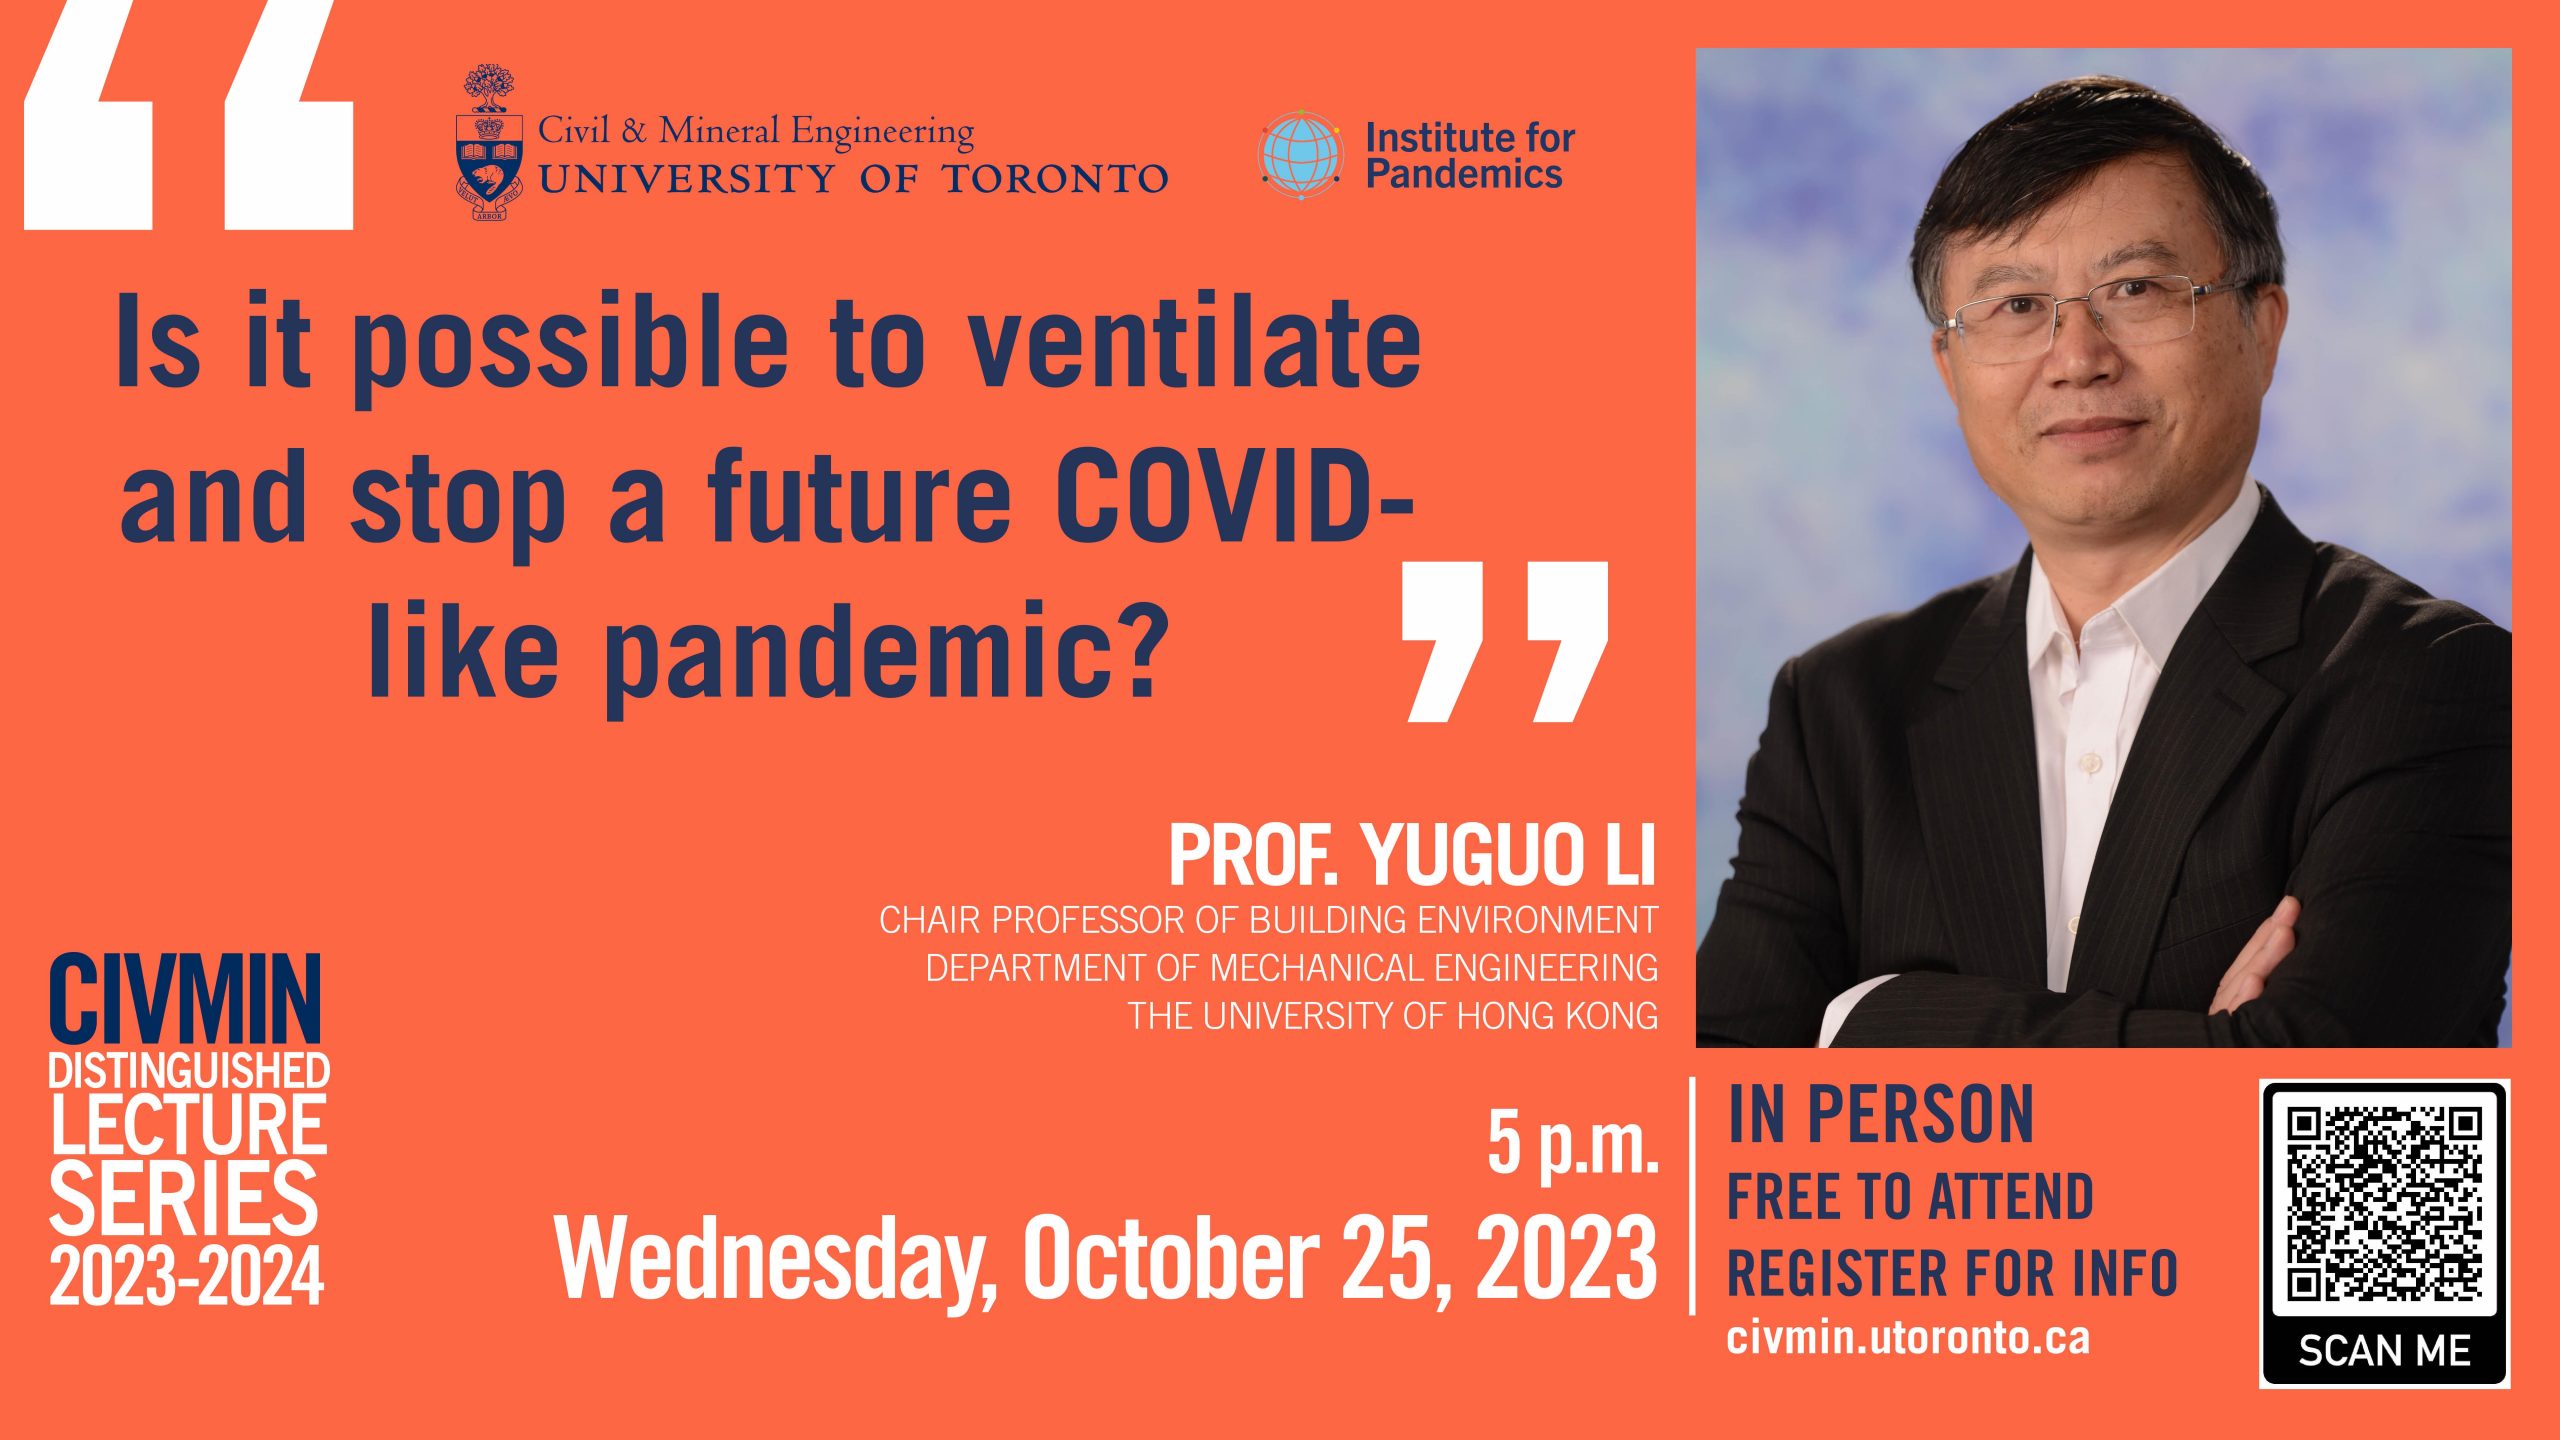 Event graphic for distinguished lecture on ventilation and pandemics